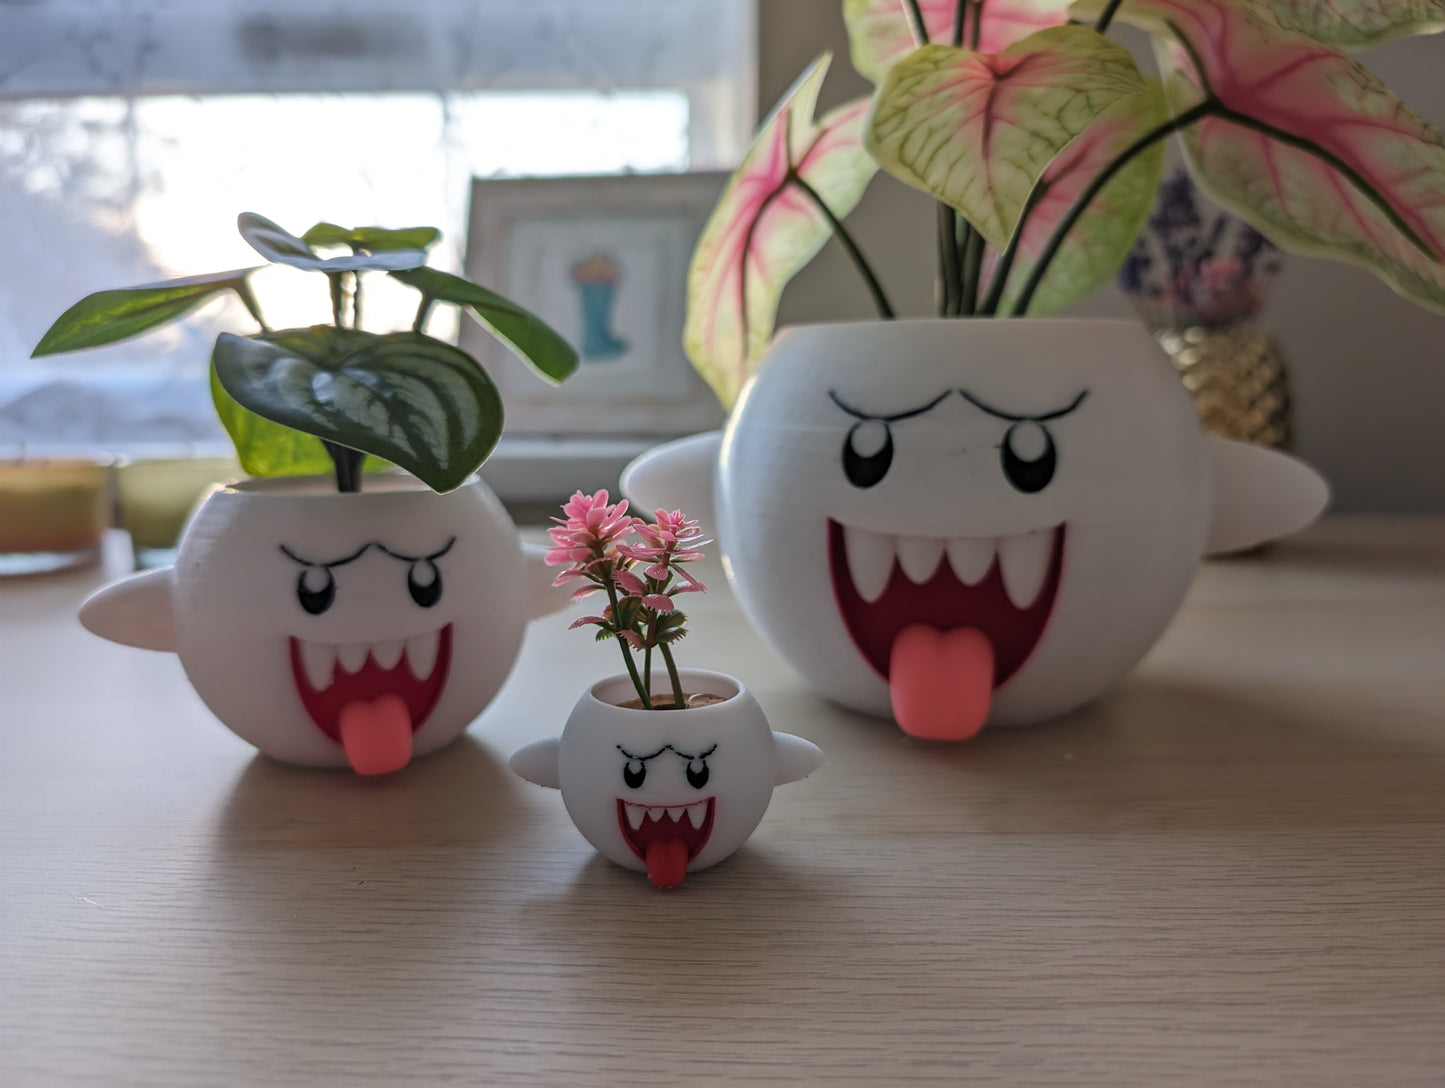 Mario Boo planters in various sizes on desk